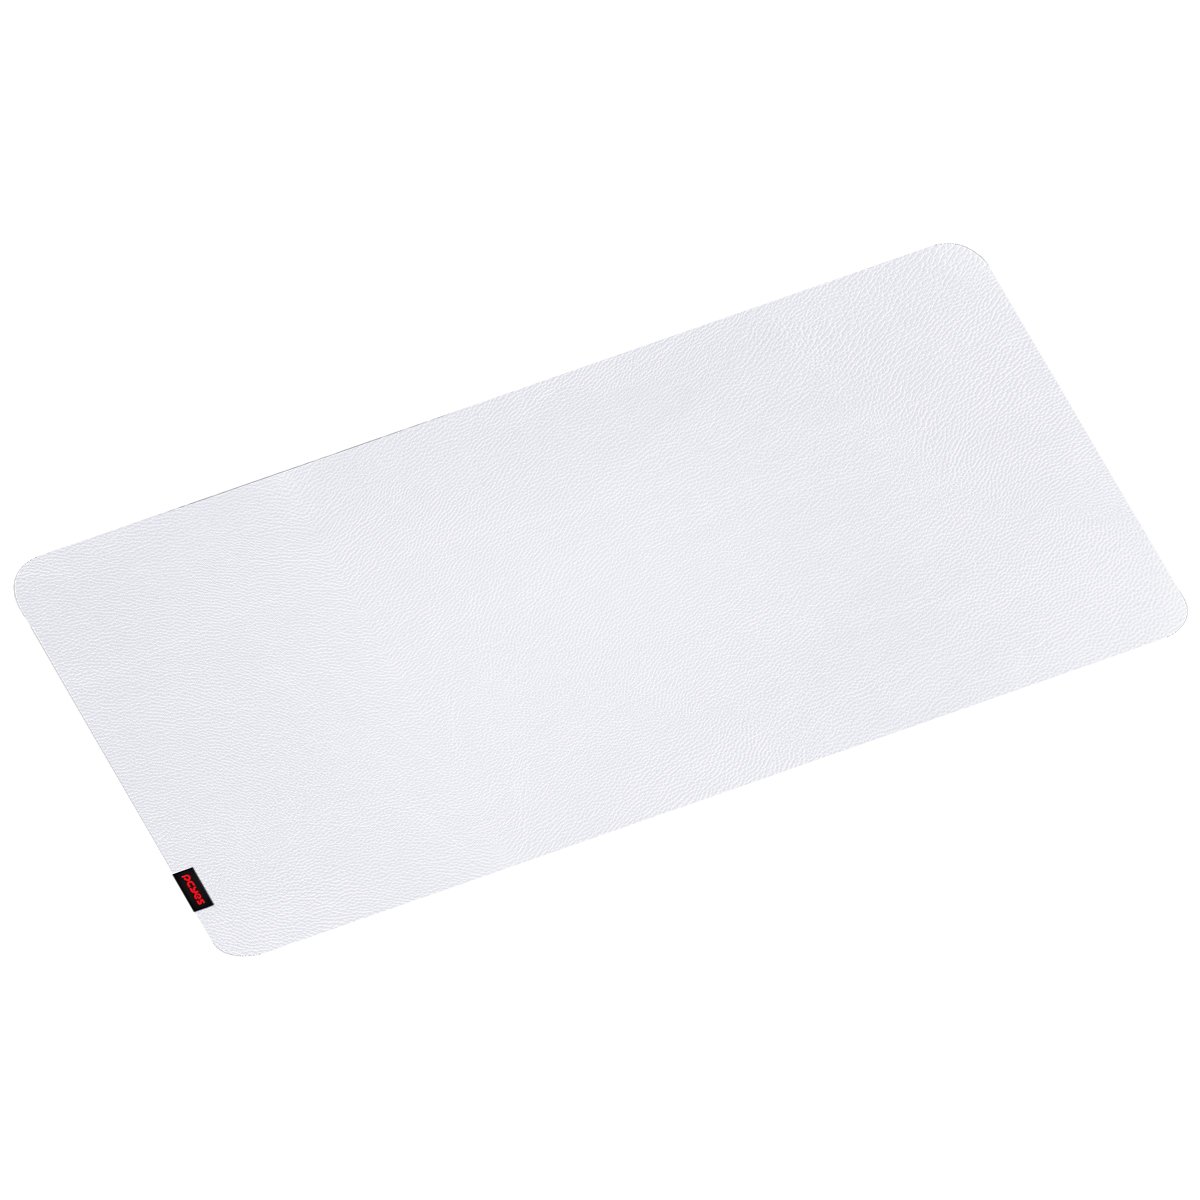 Mouse Pad Exclusive Branco 800x400 - Pmpexw - 2